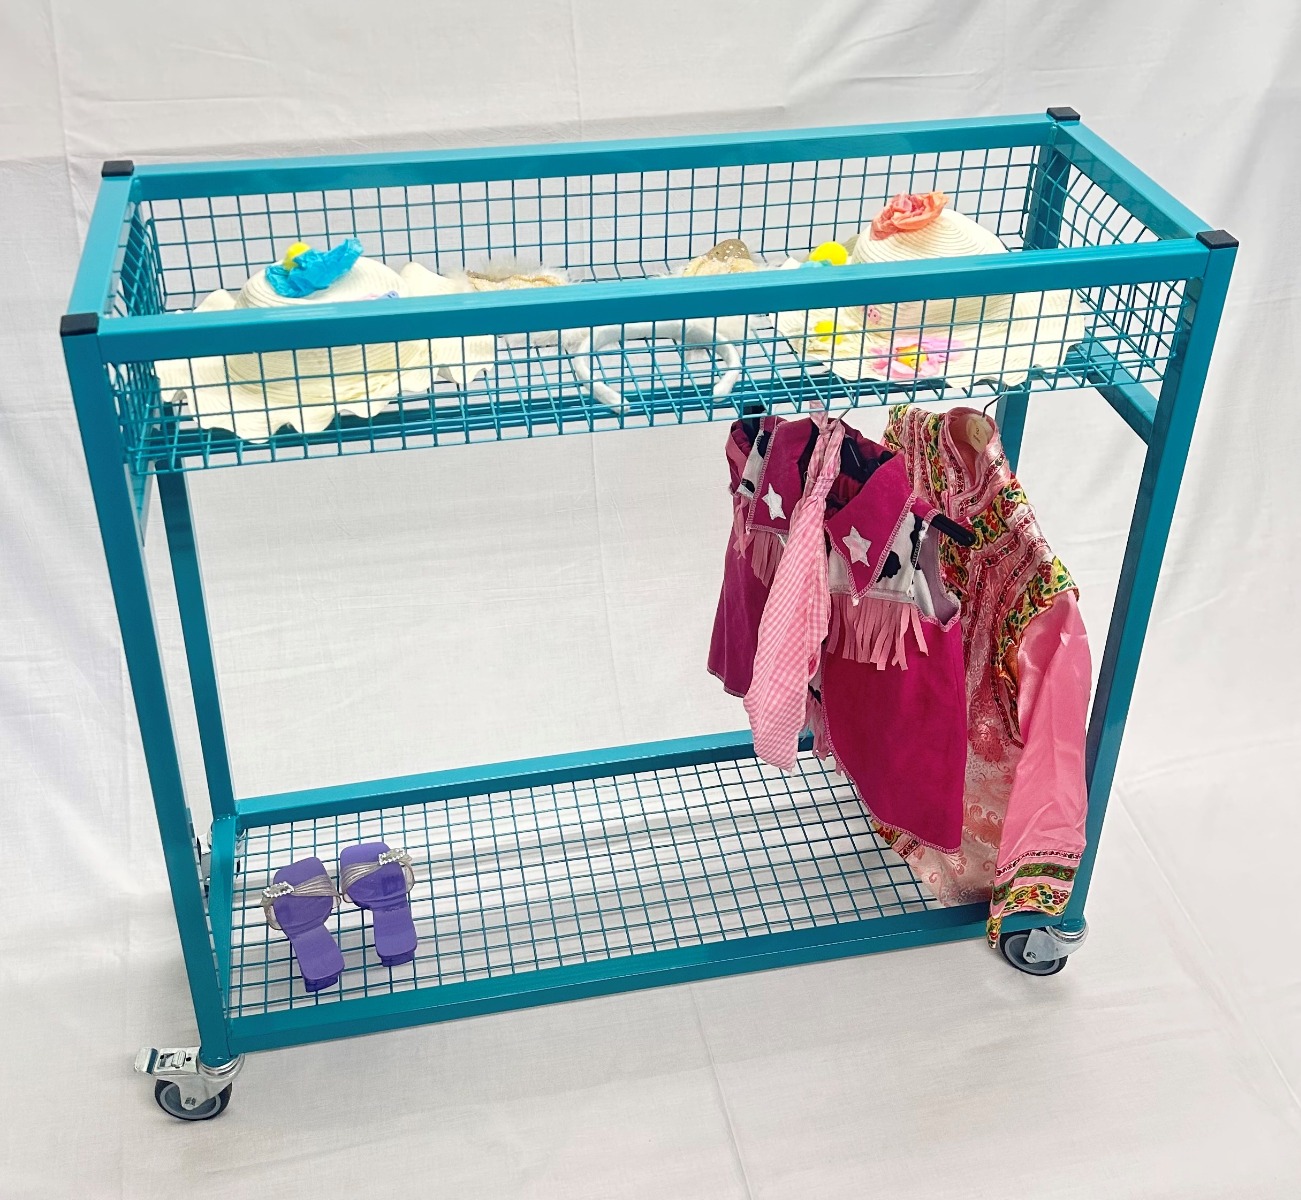 DR100 Costume Trolley